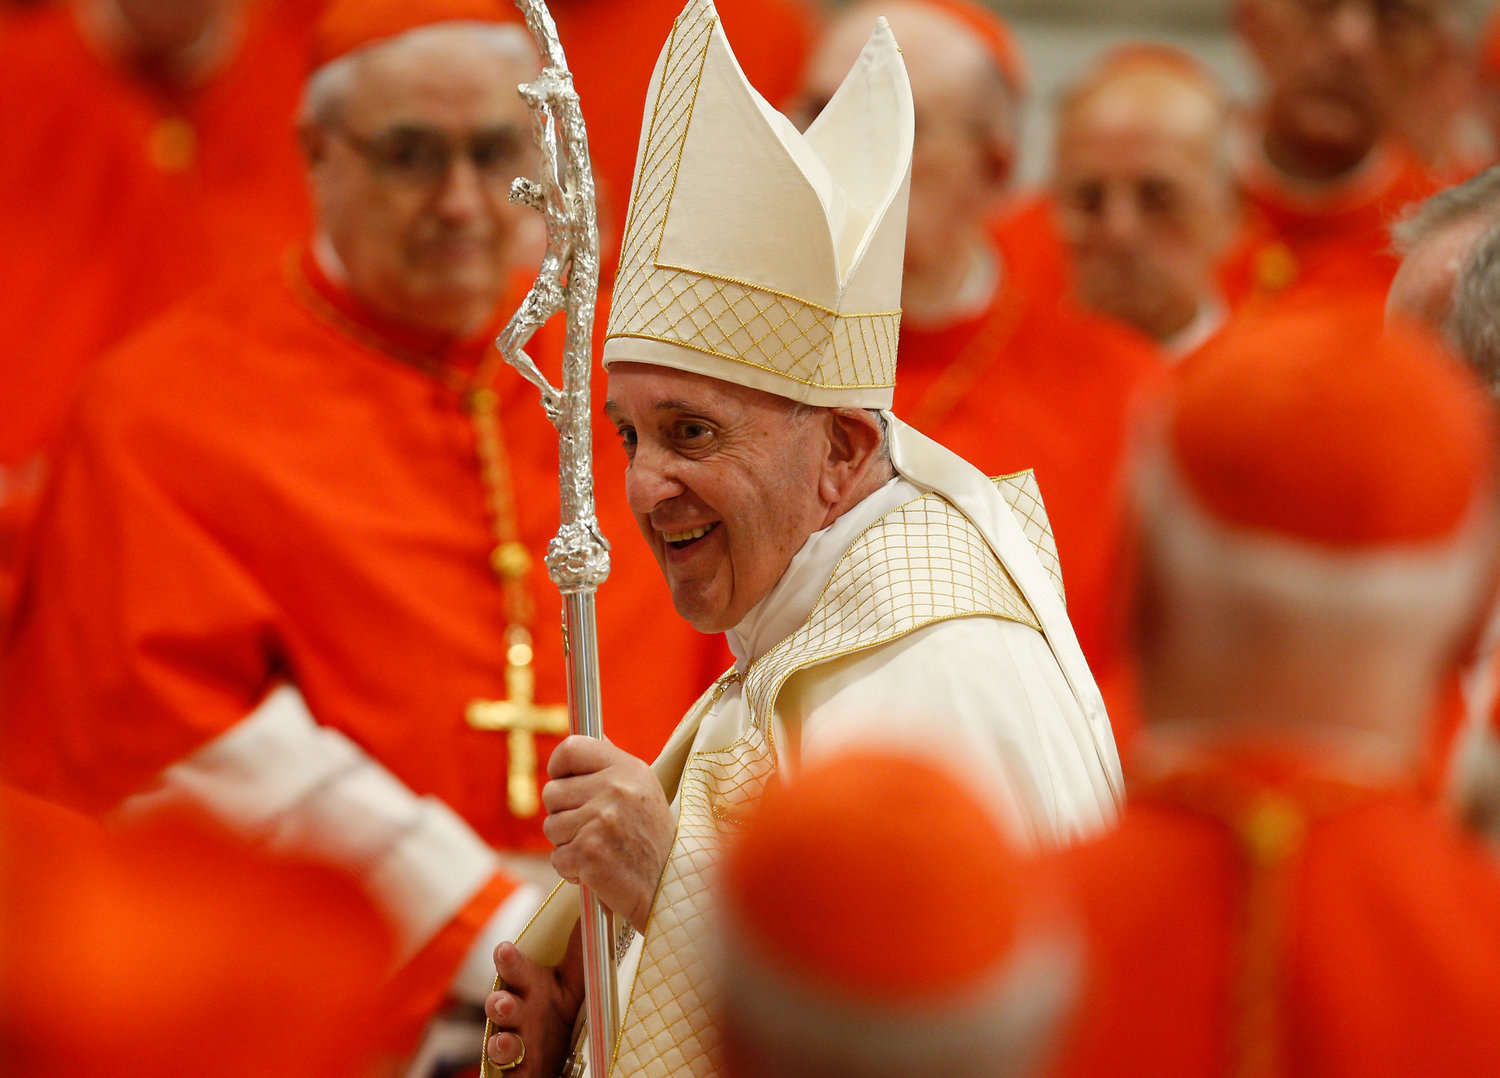 Pope Francis leaves in procession after a consistory for the creation of 13 new cardinals in St. Peter’s Basilica at the Vatican Oct. 5, 2019. Among the new cardinals was Canadian Cardinal Michael Czerny, undersecretary of the Migrants and Refugee Section of the Vatican Dicastery for Promoting Integral Human Development.